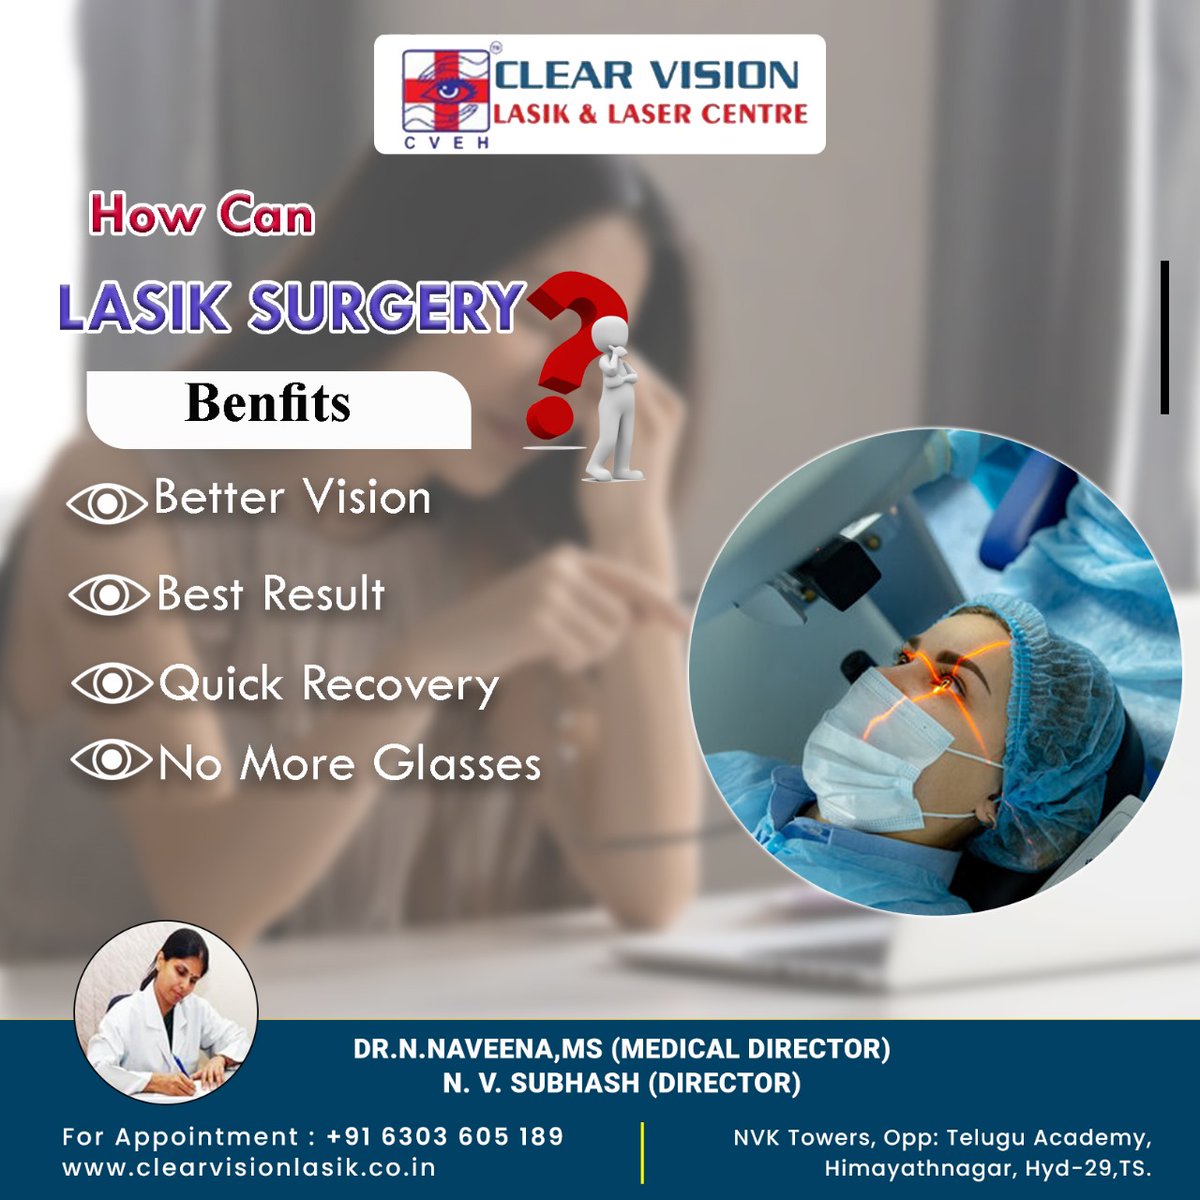 Say goodbye to glasses and contacts With LASIK surgery at Clear Vision LASIK & Laser Center, you can enjoy crystal-clear vision and the freedom to live life without the hassle of corrective lenses.

#lasik #clearvision #lasikbenefits #eyesurgery #nomorecontacts #bettervision